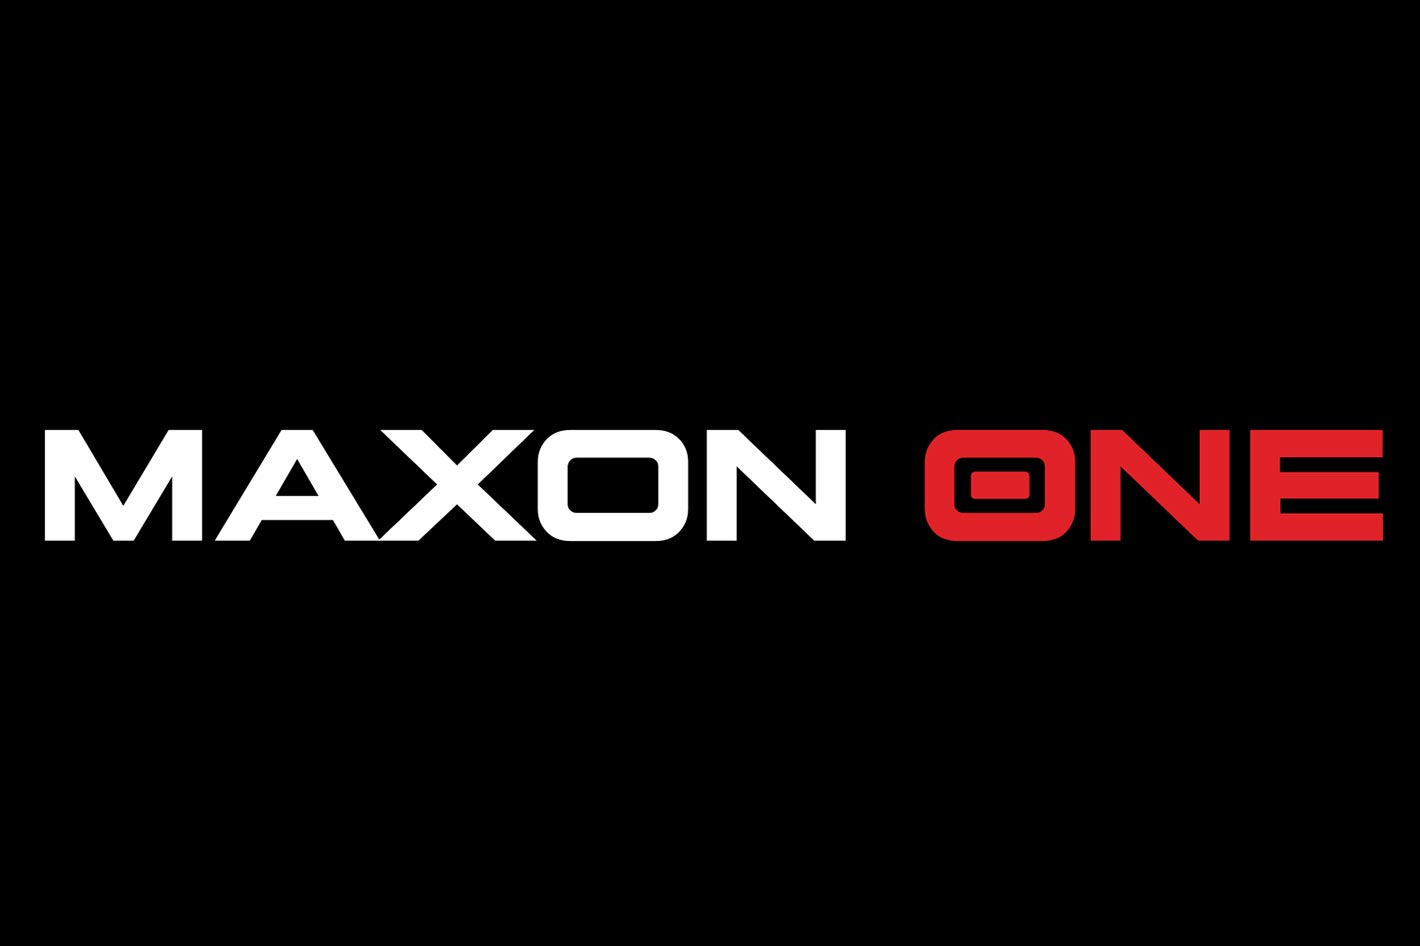 Maxon One: a low price subscription for Maxon, Red Giant and Redshift